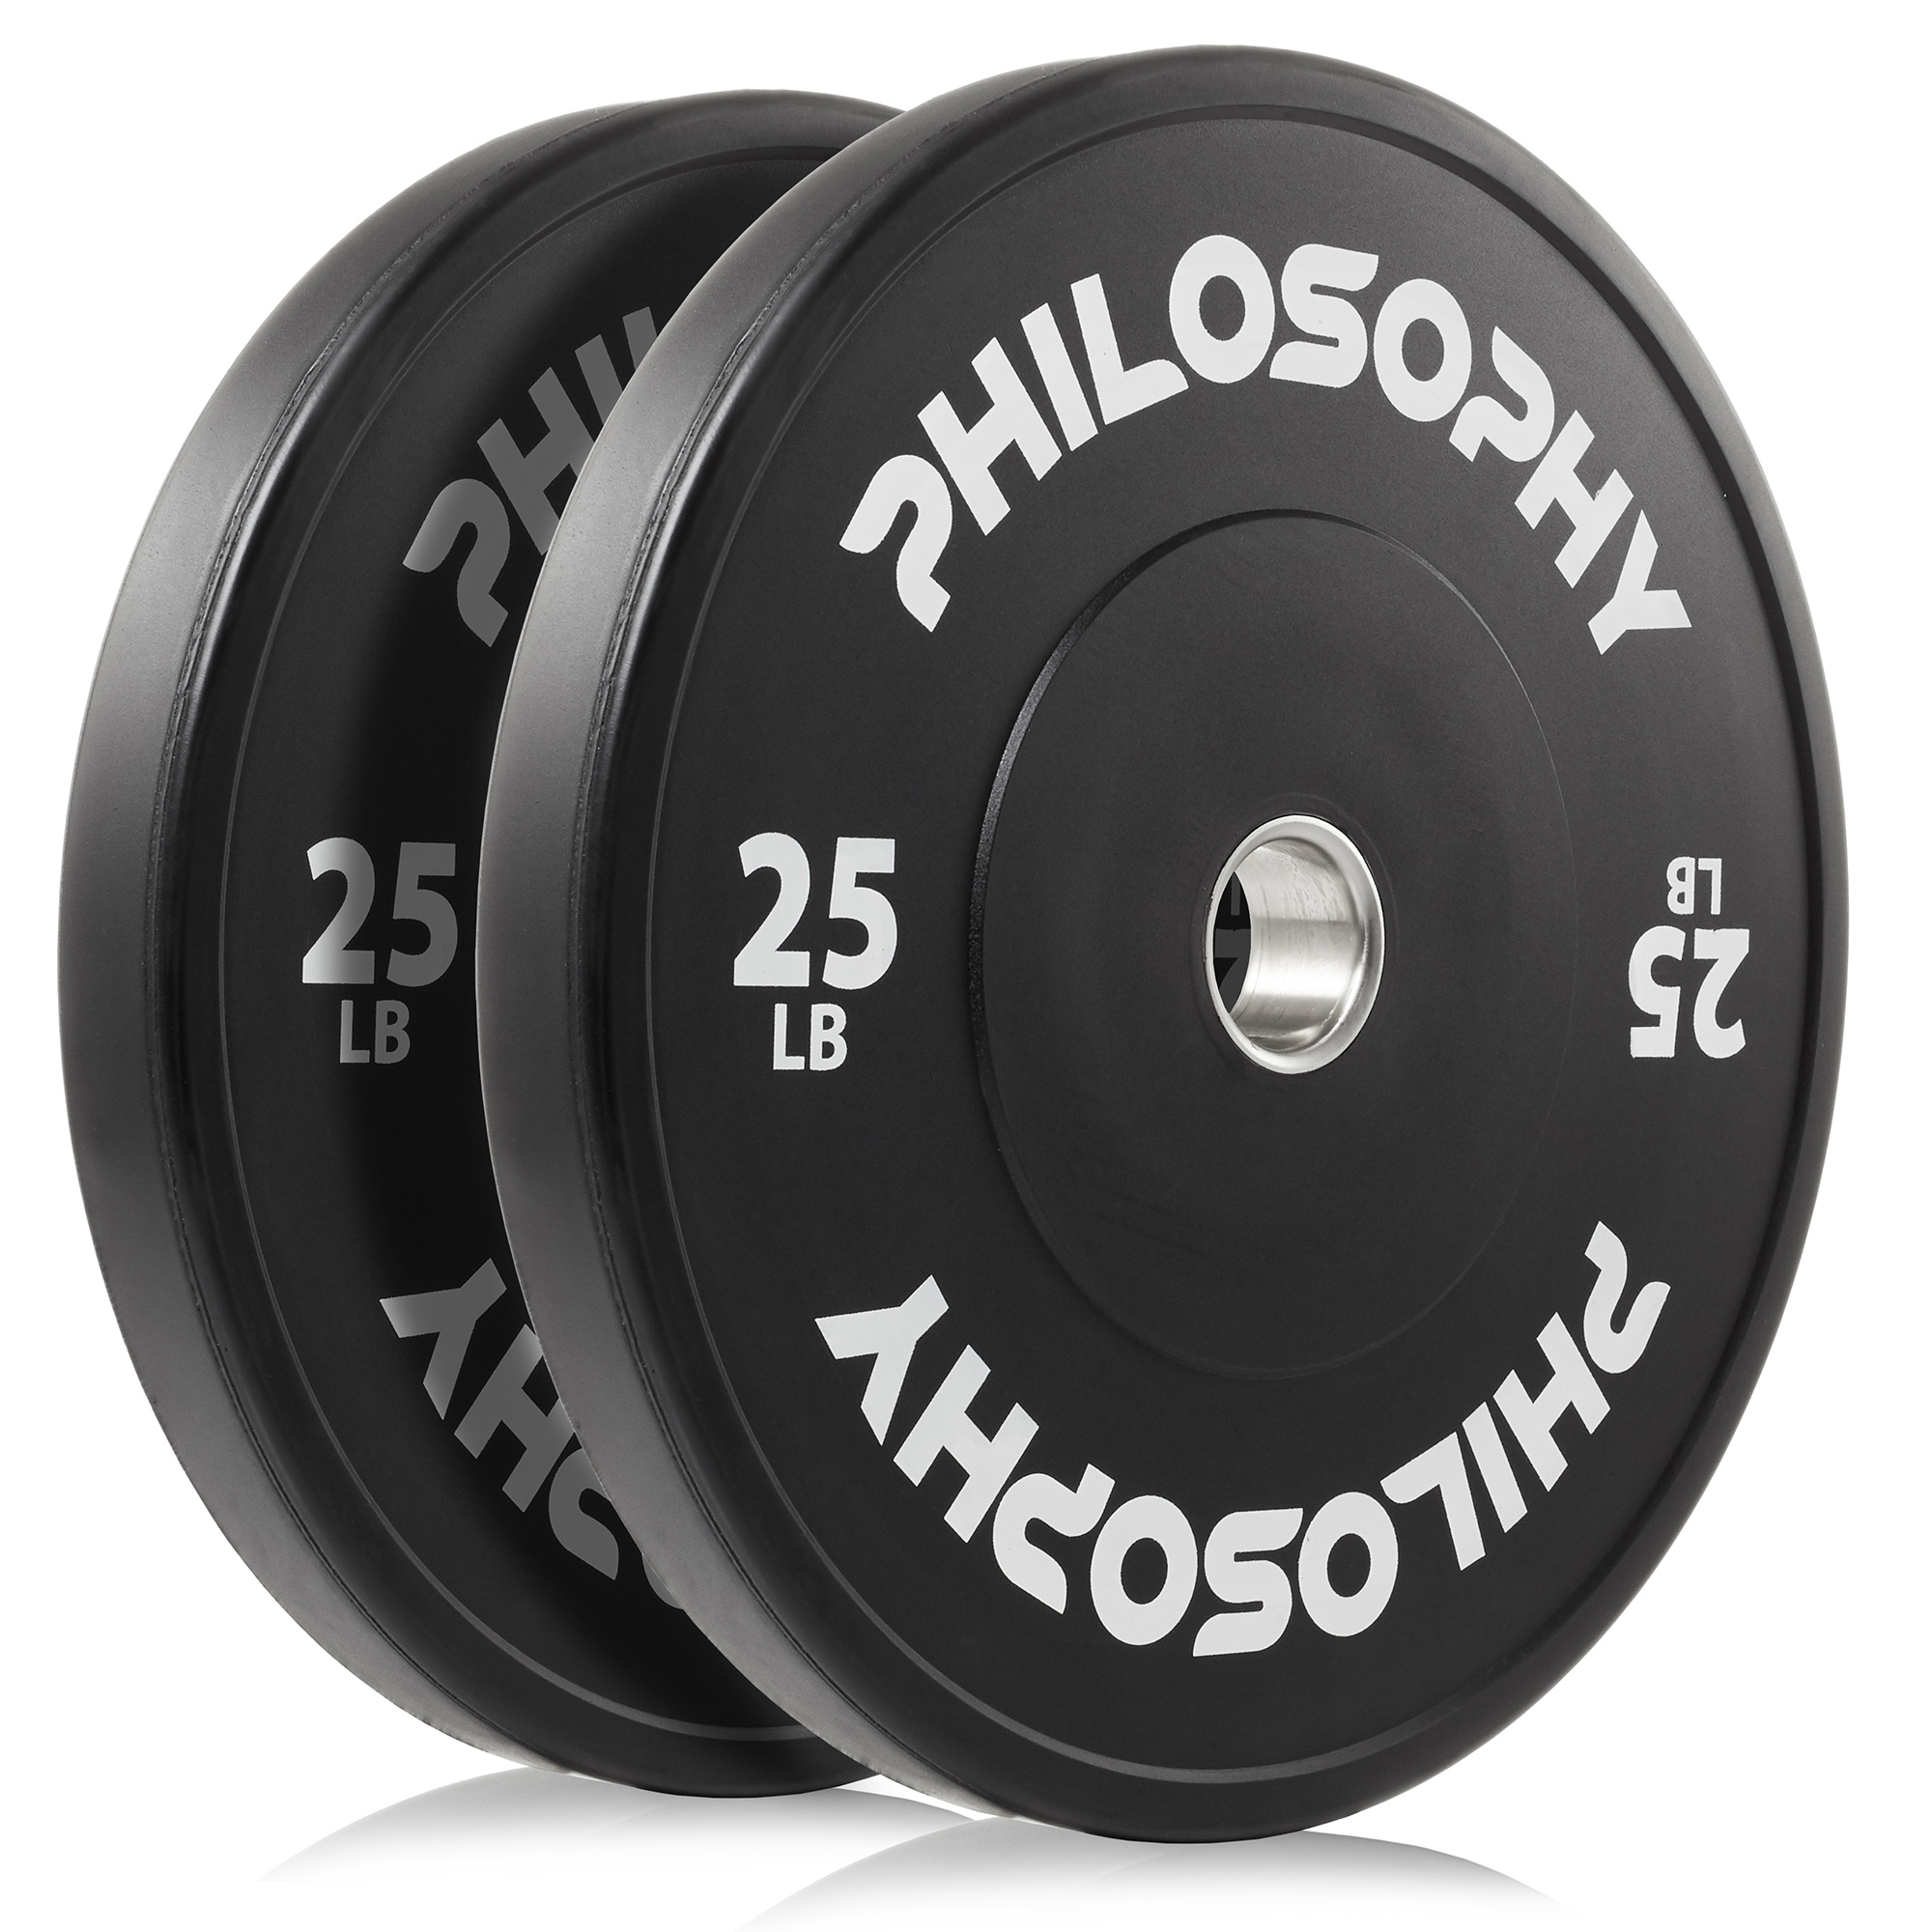 Philosophy Gym Set of 2 Olympic 2-Inch Rubber Bumper Plates (25 LB each) Black